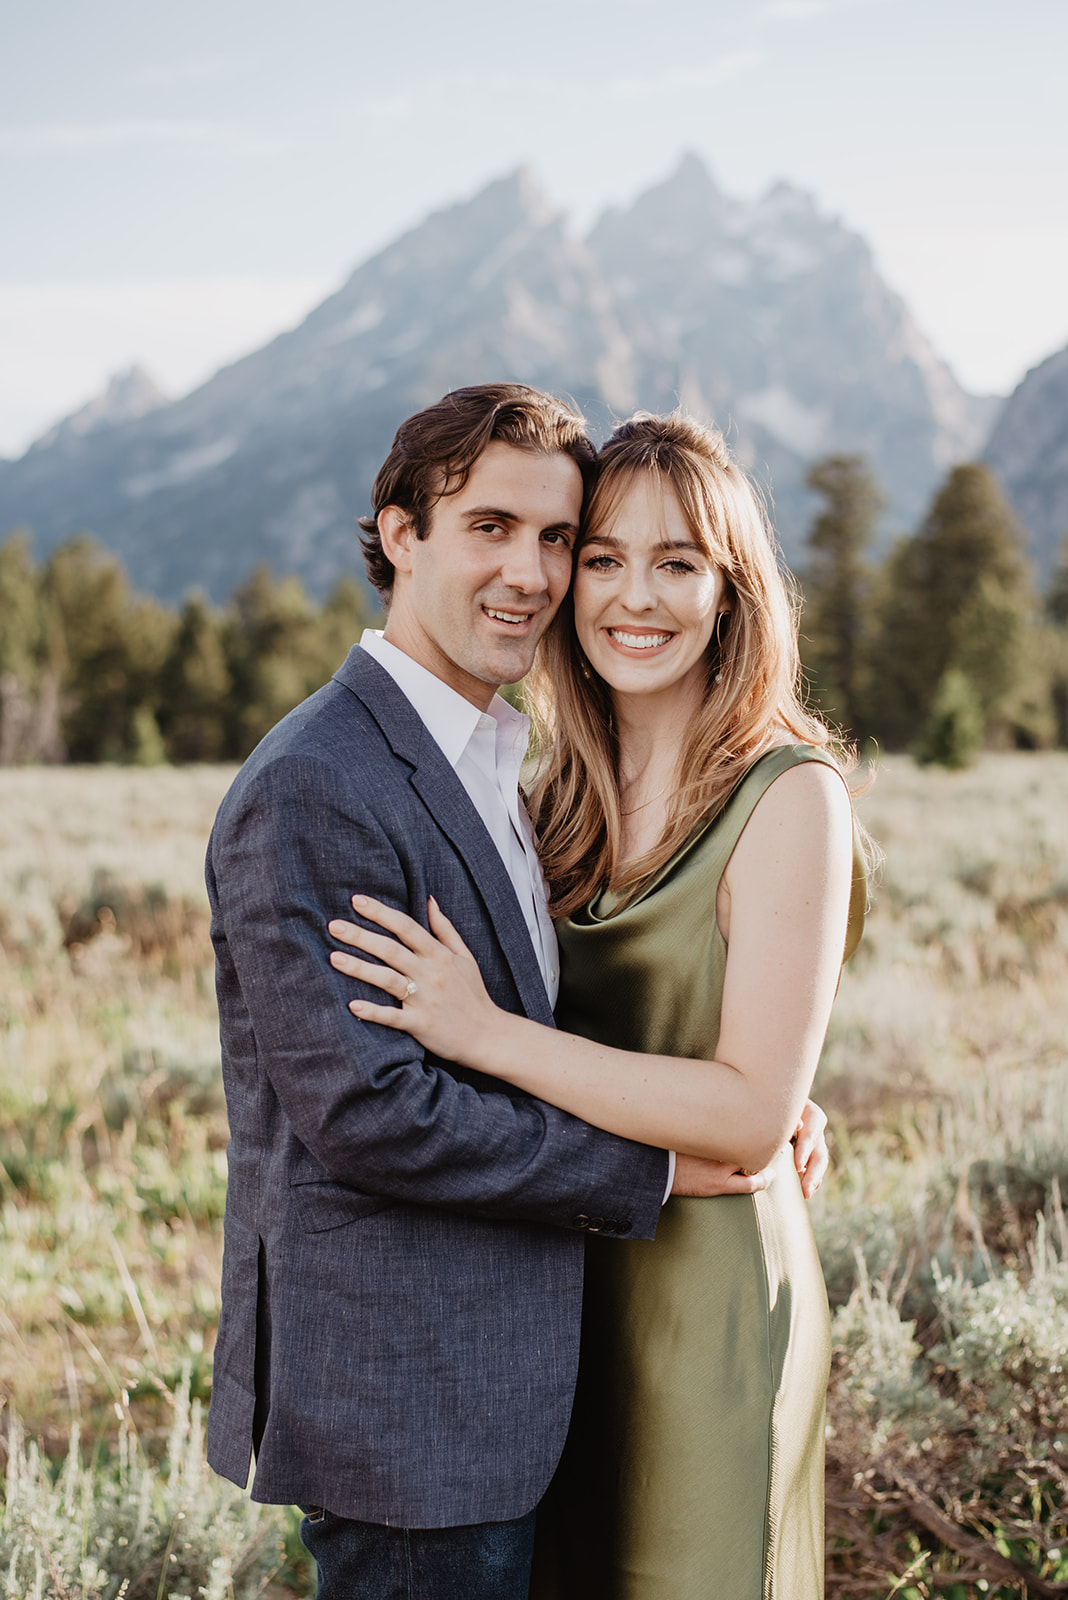 formal engagement portraits with man and woman in elegant engagement outfits holding each other and looking into the camera as they smile